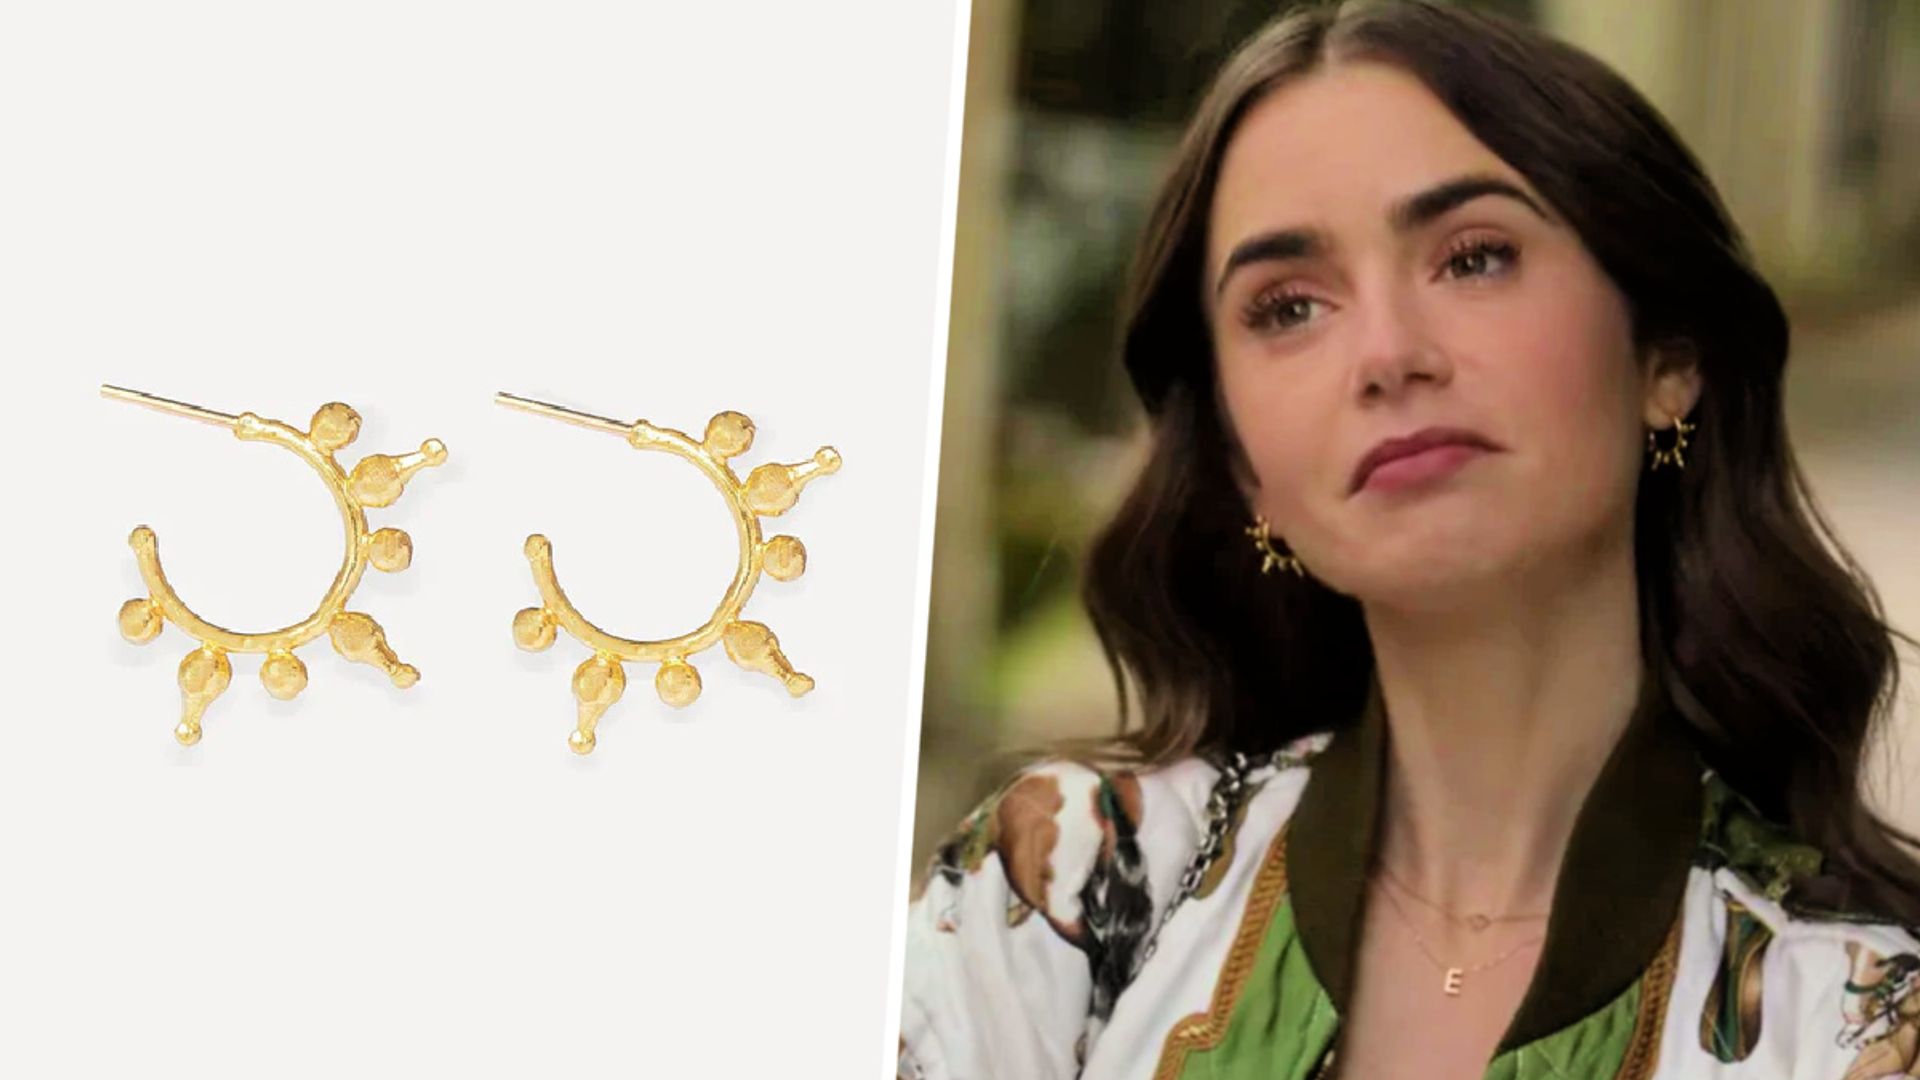 Emily in Paris fan? This is the affordable jewellery worn by Lily Collins in the show